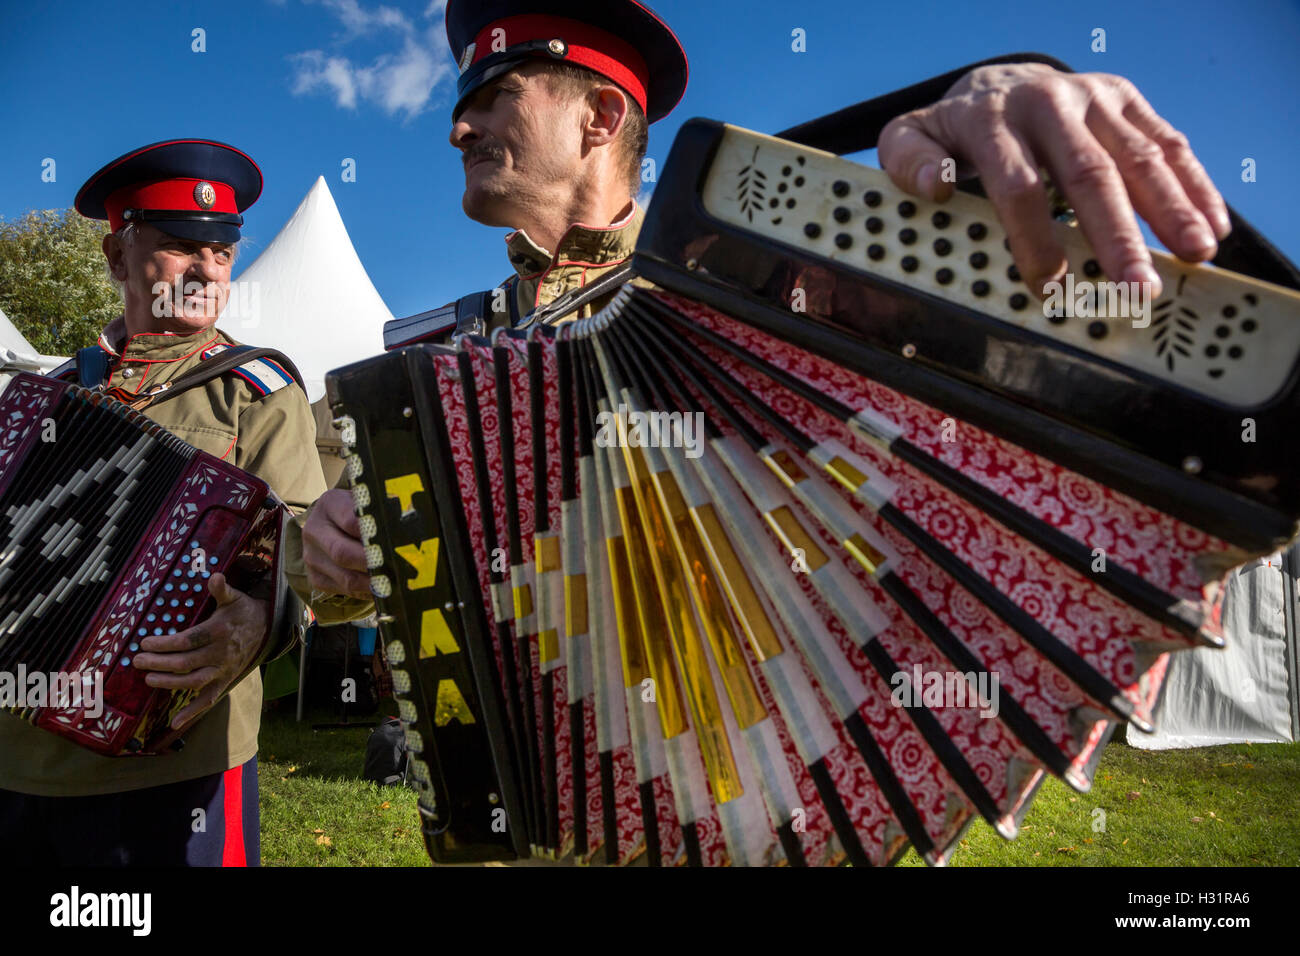 Cossacks play a button accordion during annual festival 'Cossack village - Moscow' in Moscow Tsaritsyno Park, Russia Stock Photo